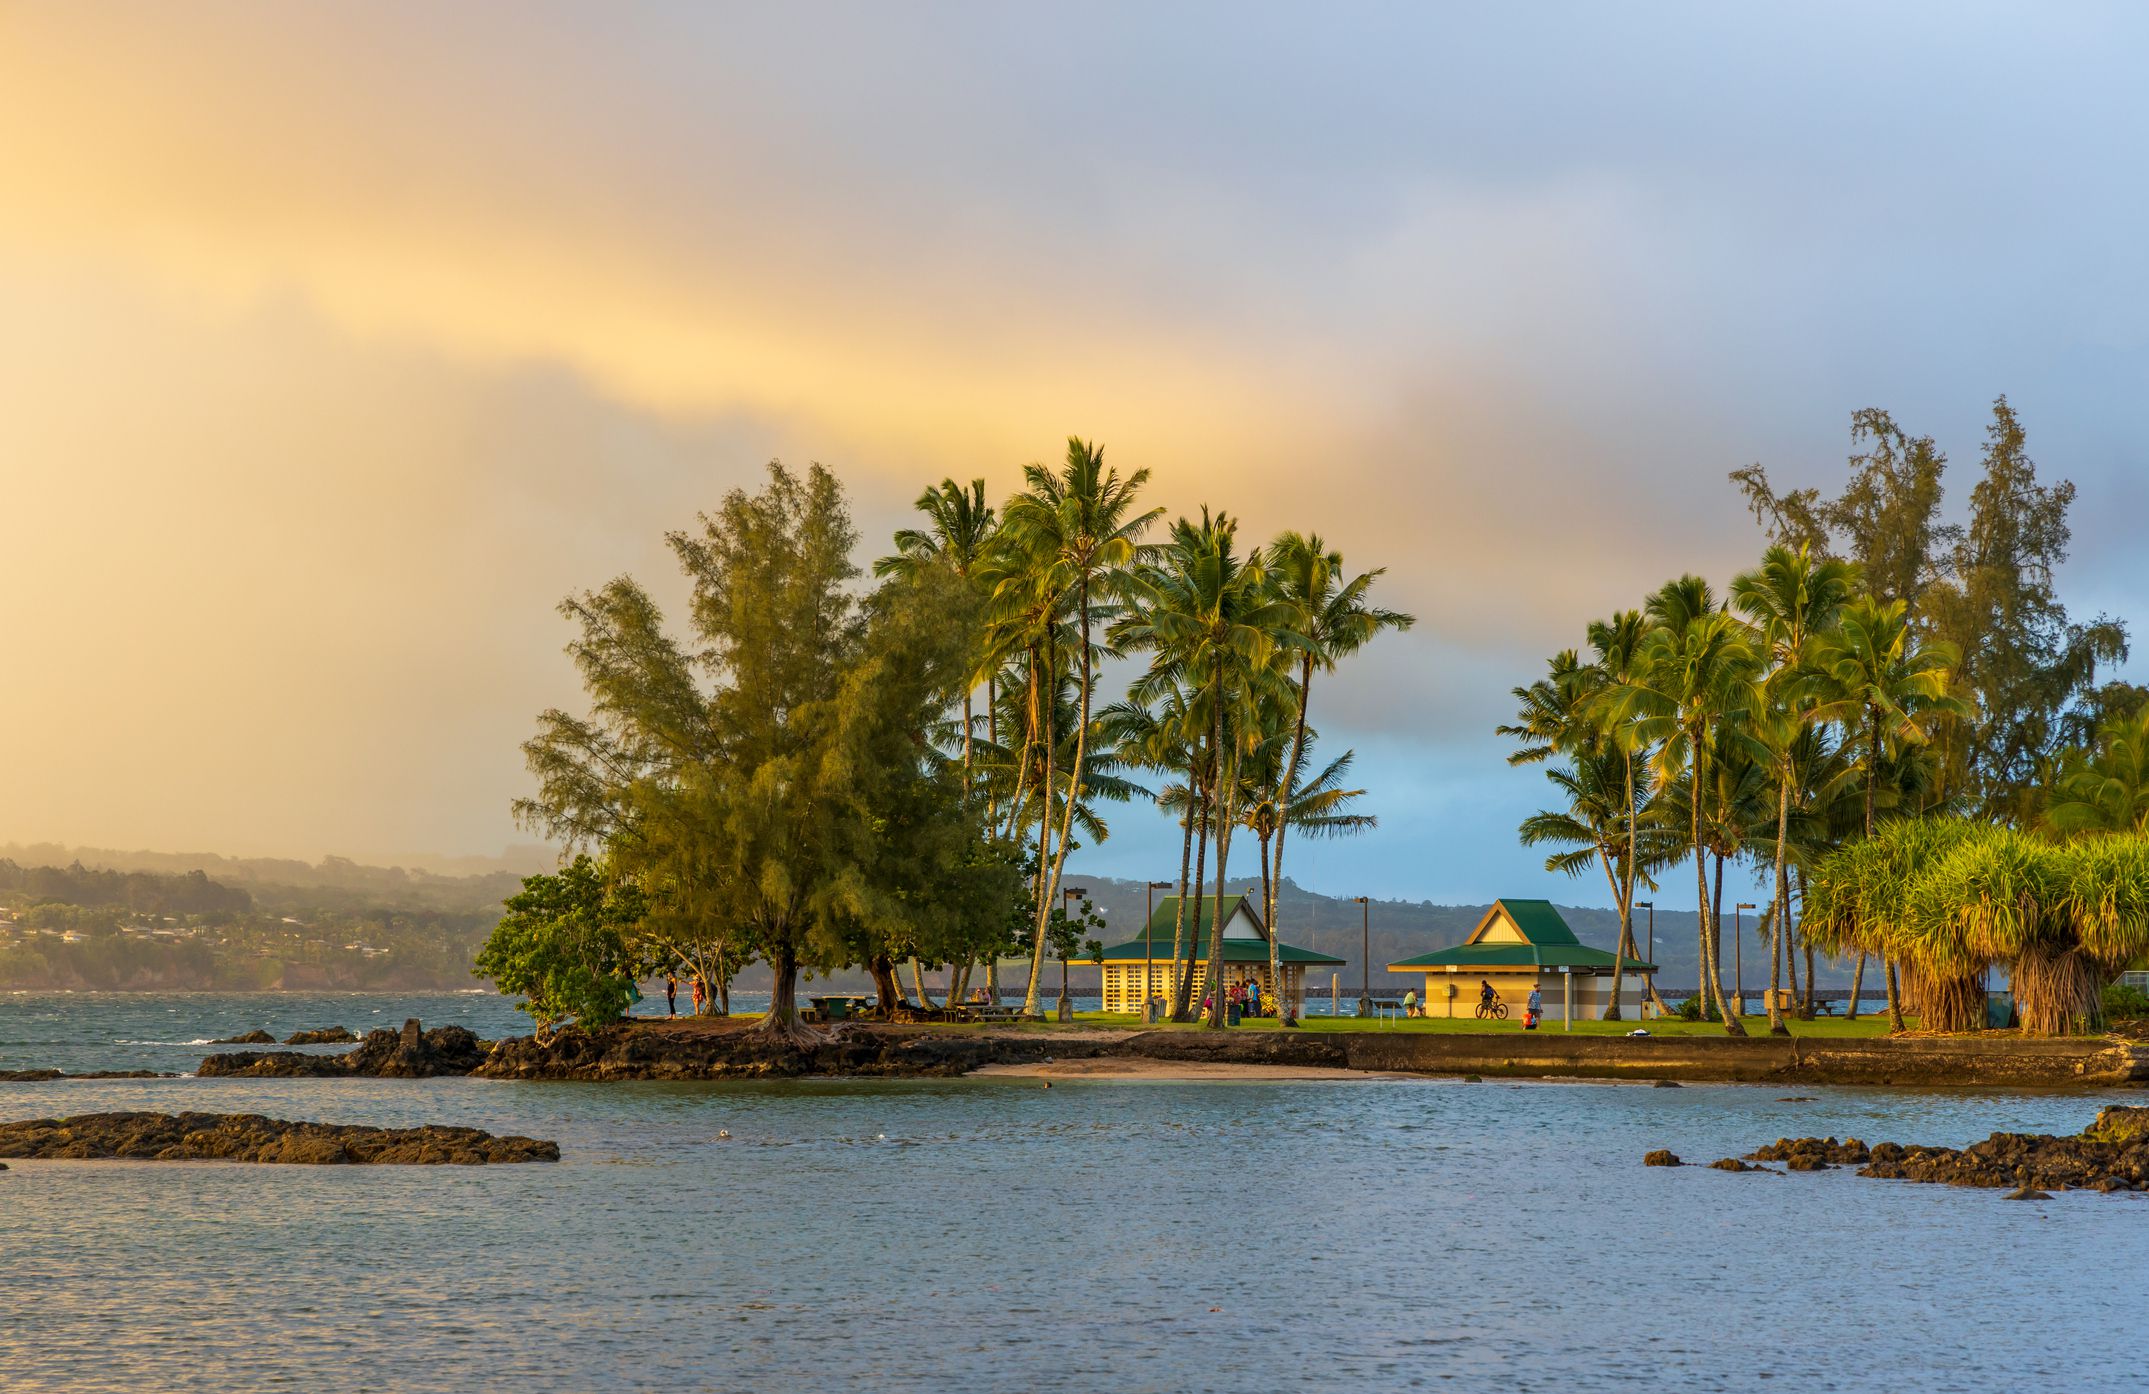 <p>If you’re looking to raise a family in Hawaii, here are five cities that provide great options for community, resources, and schools.</p><h3 class="u-color-ink u-margin-bottom-sm u-margin-top-ms@tablet-and-desktop u-margin-top-sm@mobile">1. Hilo, Hawaii</h3><p>With plenty of restaurants, museums and outdoor spaces to enjoy, Hilo offers plenty to do for families. Visit the Mokupāpapa Discovery Center to learn about marine life around the Hawaiian island, or take a trip to the ‘Imiloa Astronomy Center to see some of the world’s most advanced telescopes.</p><ul><li>Population: 44,186</li><li>Median Household Income: $70,356</li><li>Cost of Living: 127% of U.S. average</li><li>Median Rent Price: $1,650</li><li>Home Price-to-Income Ratio: 7</li><li>Average Property Tax: 0.39%</li></ul><p class="padding-top-ms u-margin-bottom-ms"><b>Housing Affordability: </b>As noted above, the median rent price in Hilo is $1,650. For those looking to buy, the average home value is about $489,000. If you are getting serious about a home search, consider <a href="https://www.sofi.com/learn/content/mortgage-pre-approval-process/">getting preapproved for a mortgage</a> to make yourself more competitive in the housing market.</p>